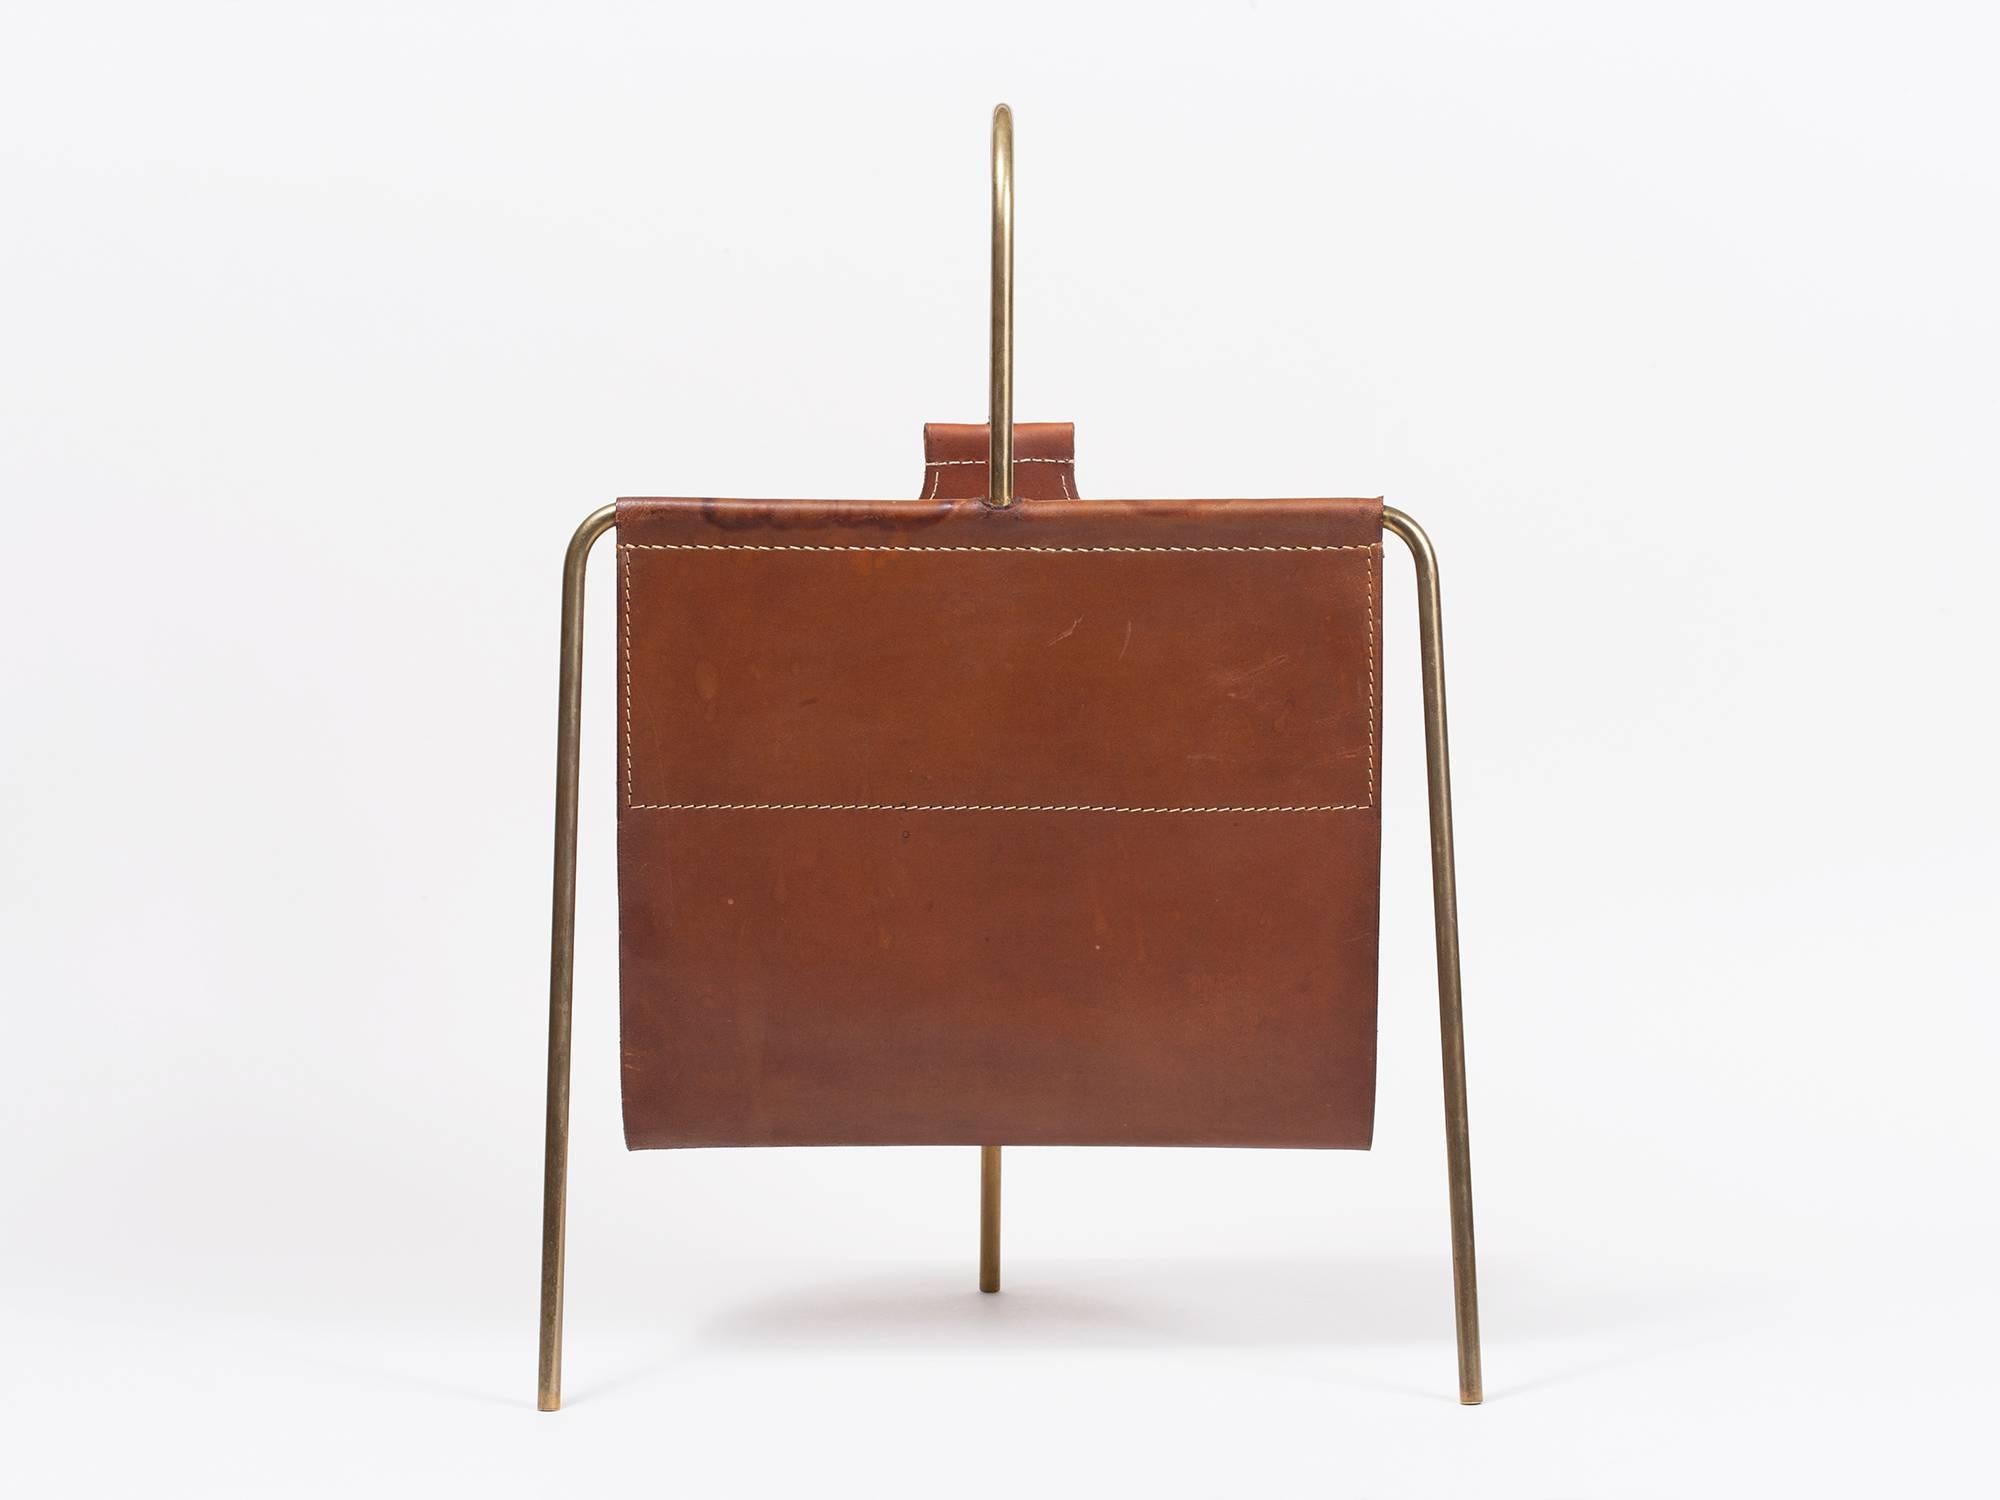 Brass and leather magazine holder by Viennese master designer Carl Auböck, made in Austria in the 1950s.